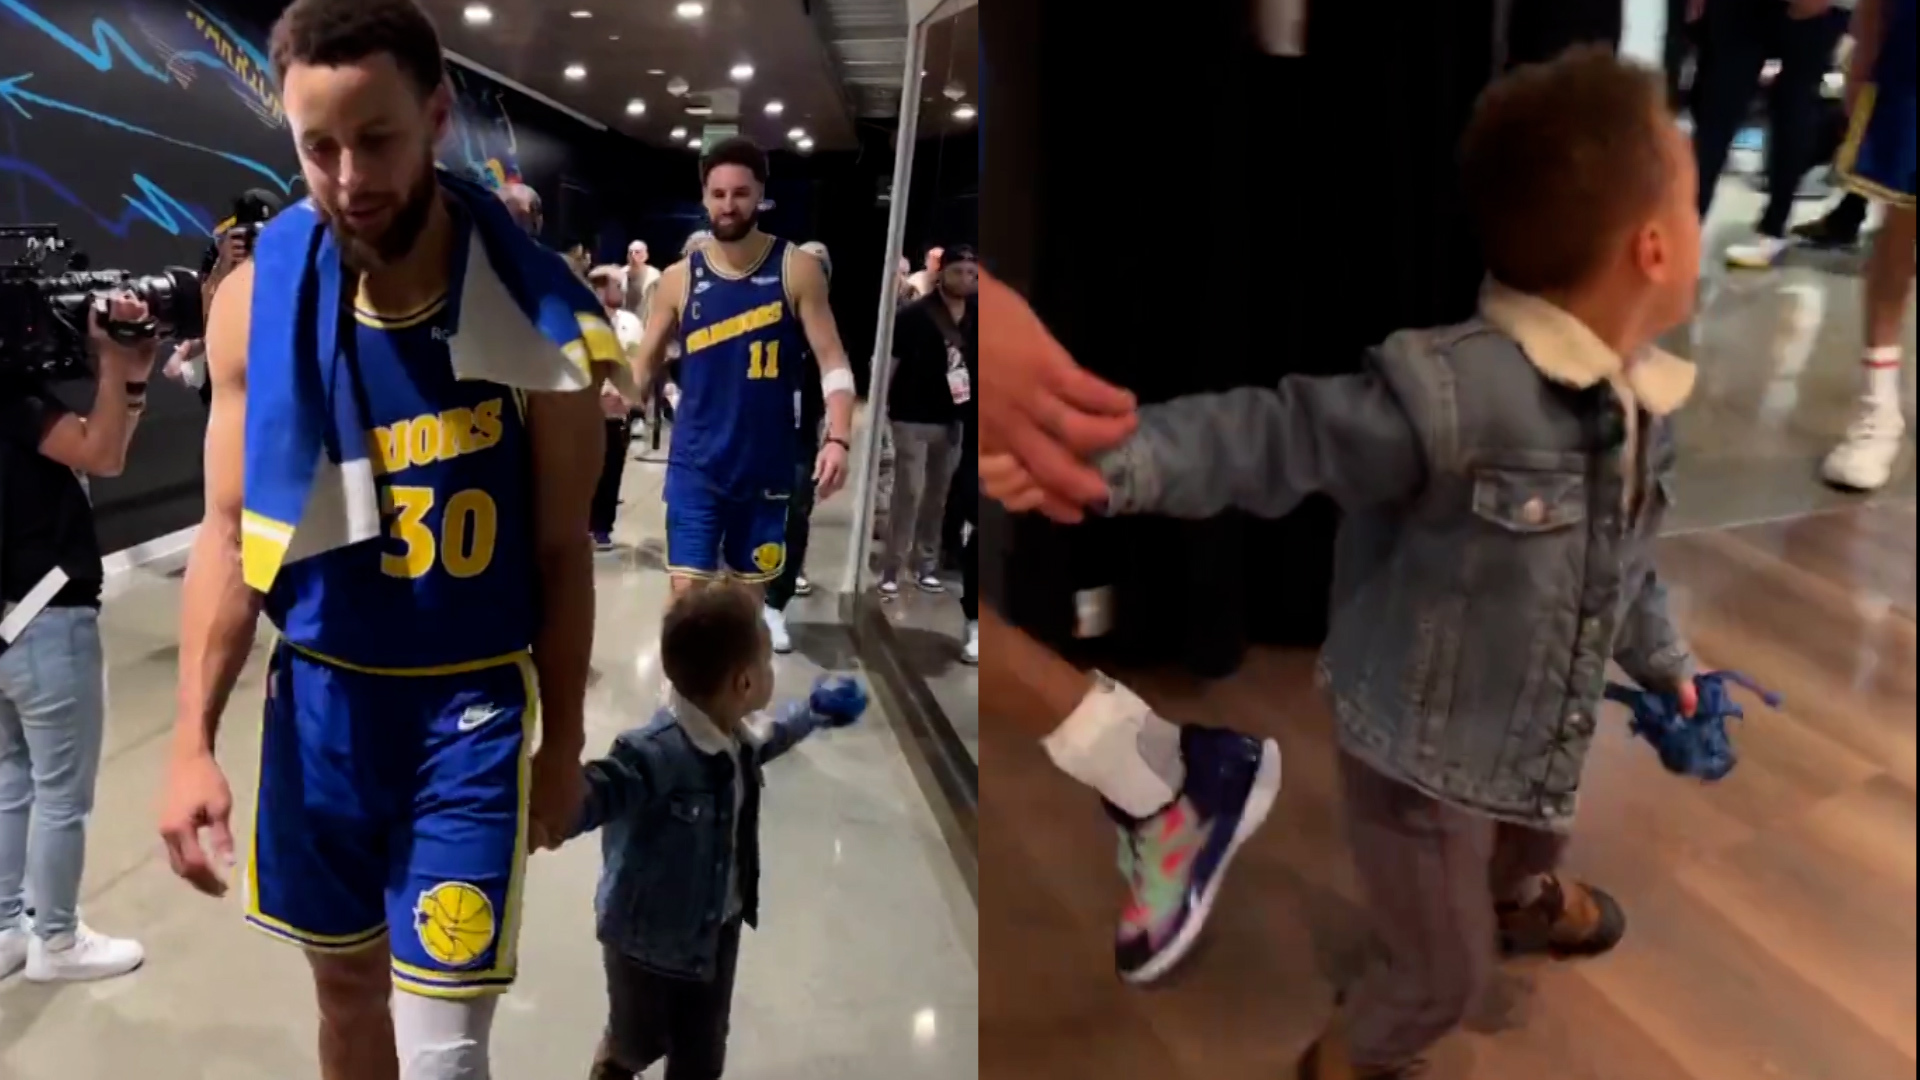 Steph's Curry's son Canon adorably greets Klay Thompson during post-match interview